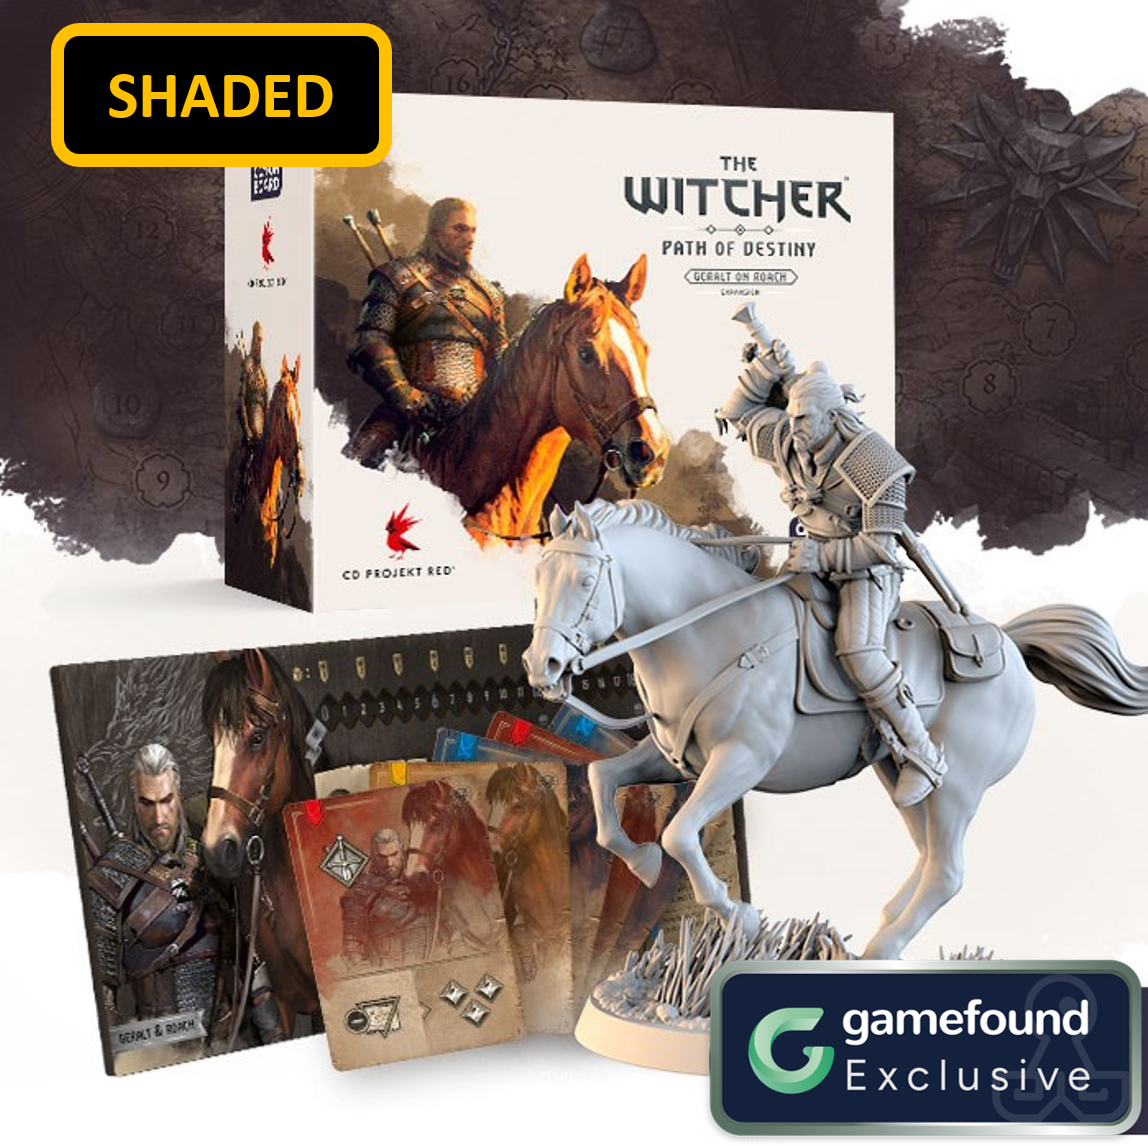 Gamefound Exclusive The Witcher: Path of Destiny Board Game Geralt on Roach Expansion, Shaded Edition